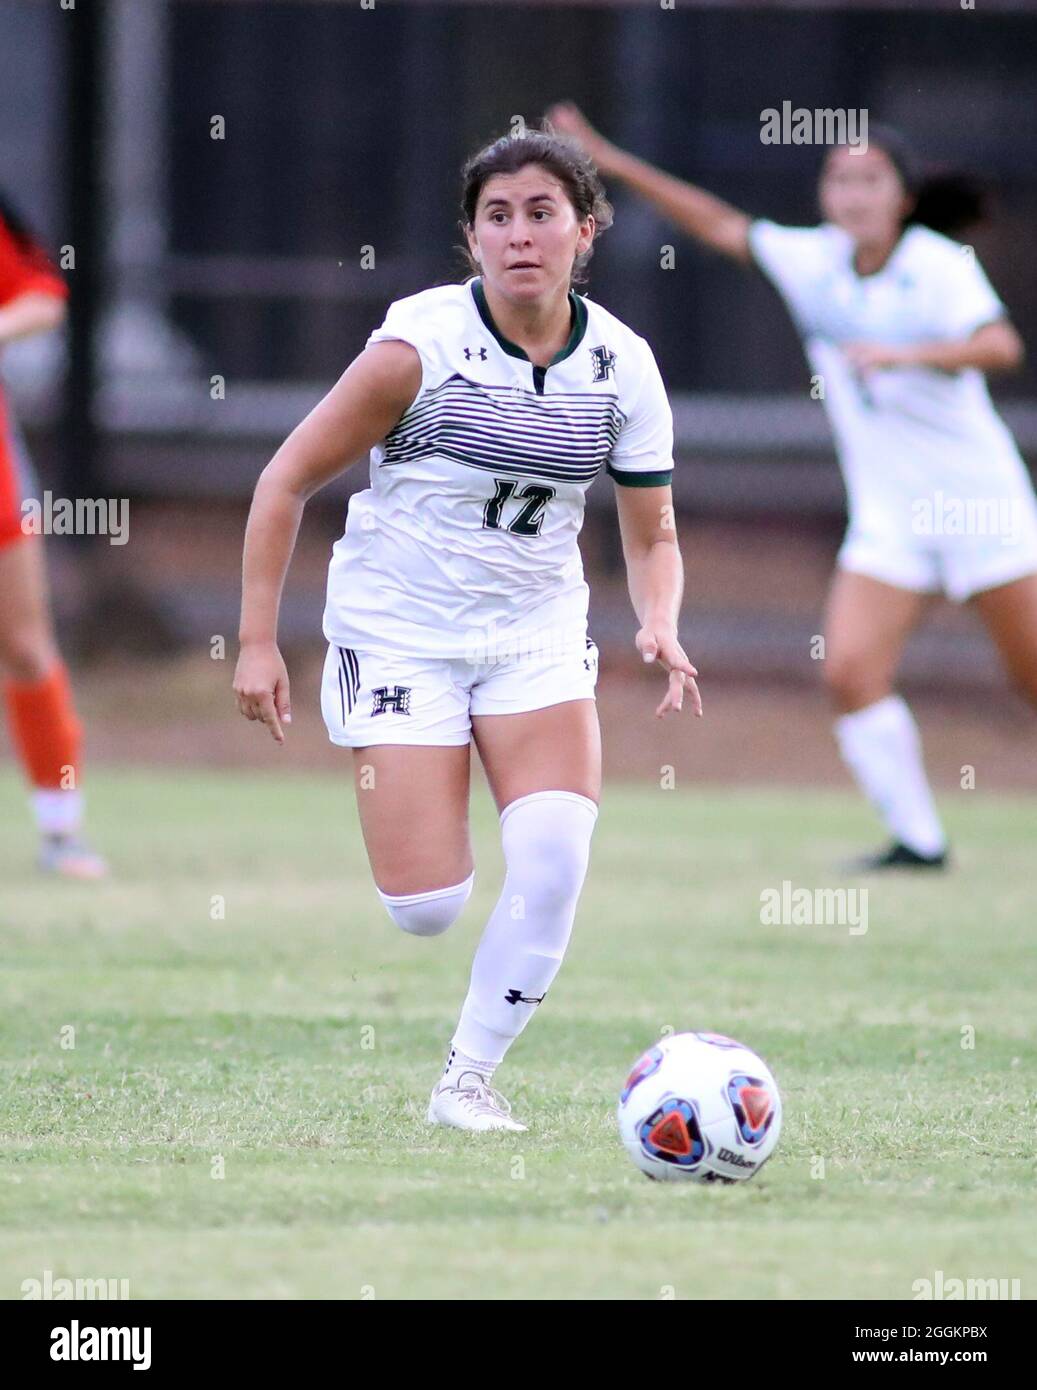 August 17, 2021 - Hawaii Rainbow Warriors forward Krista Peterson #12 during a game between the Hawaii Rainbow Warriors and the Tusculum University Pioneers at the Manoa Lower Campus Field at the University of Hawaii in Honolulu, HI - Michael Sullivan/CSM Stock Photo